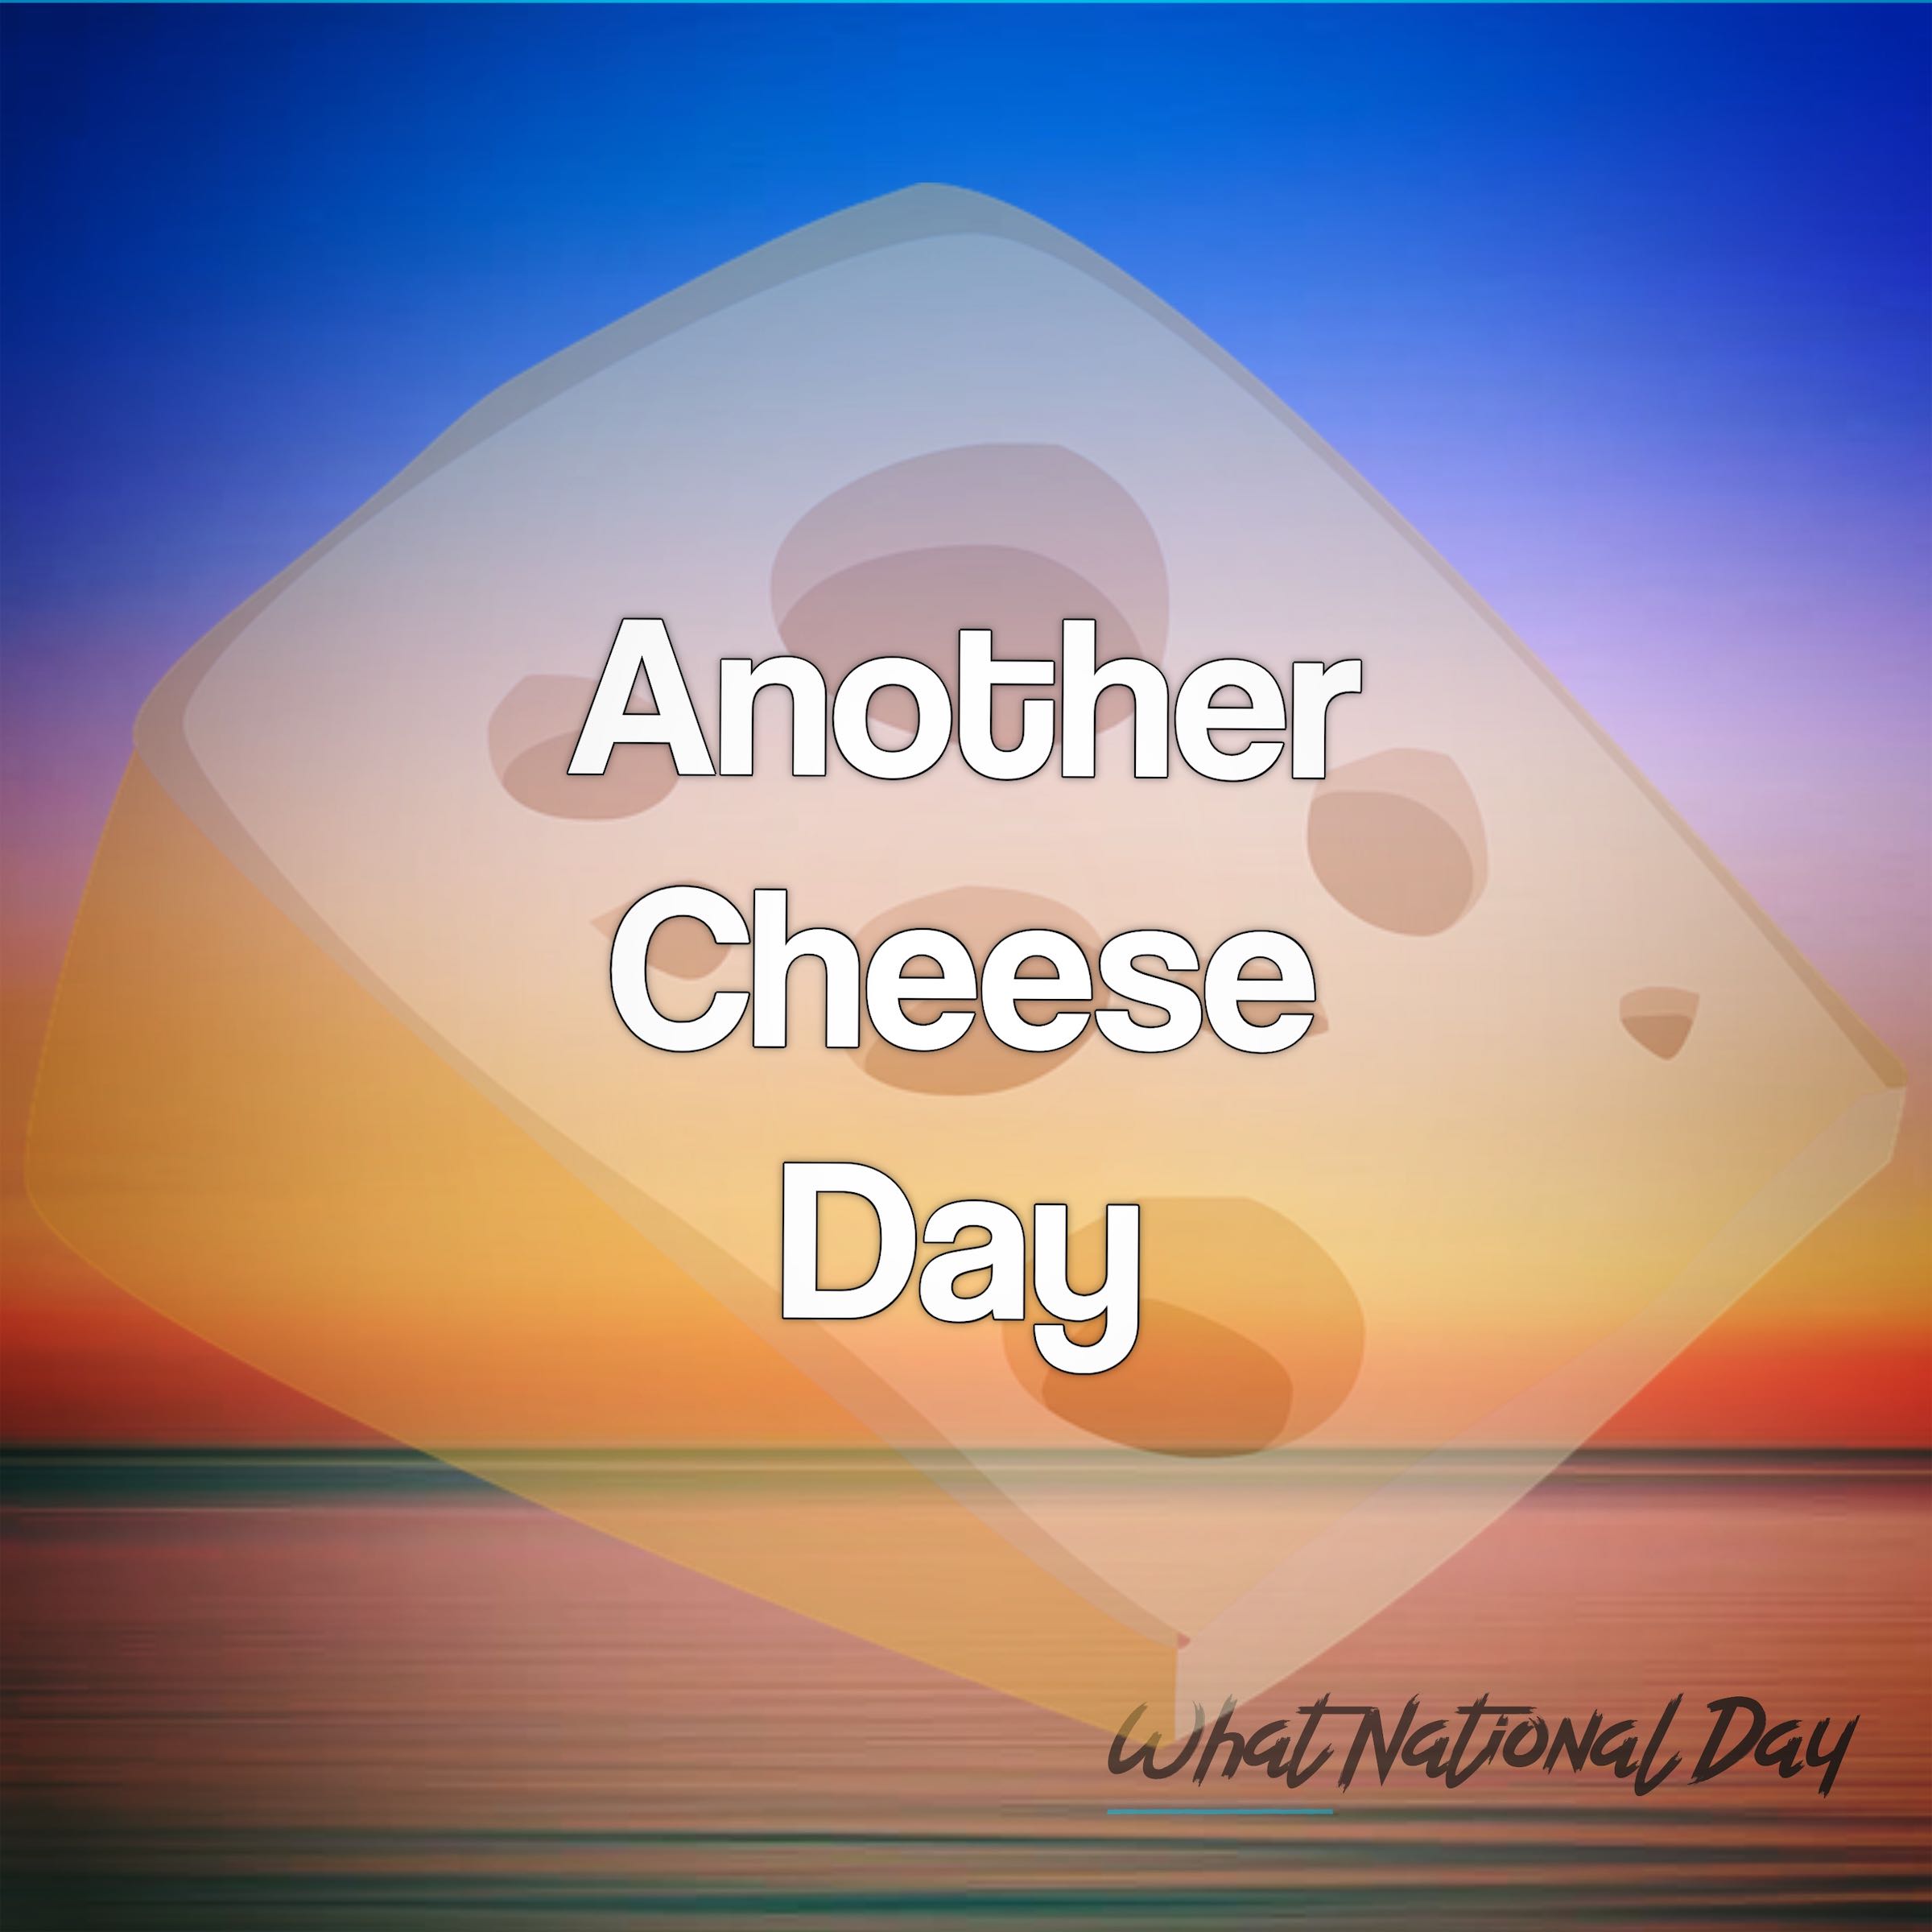 Another Cheese Day